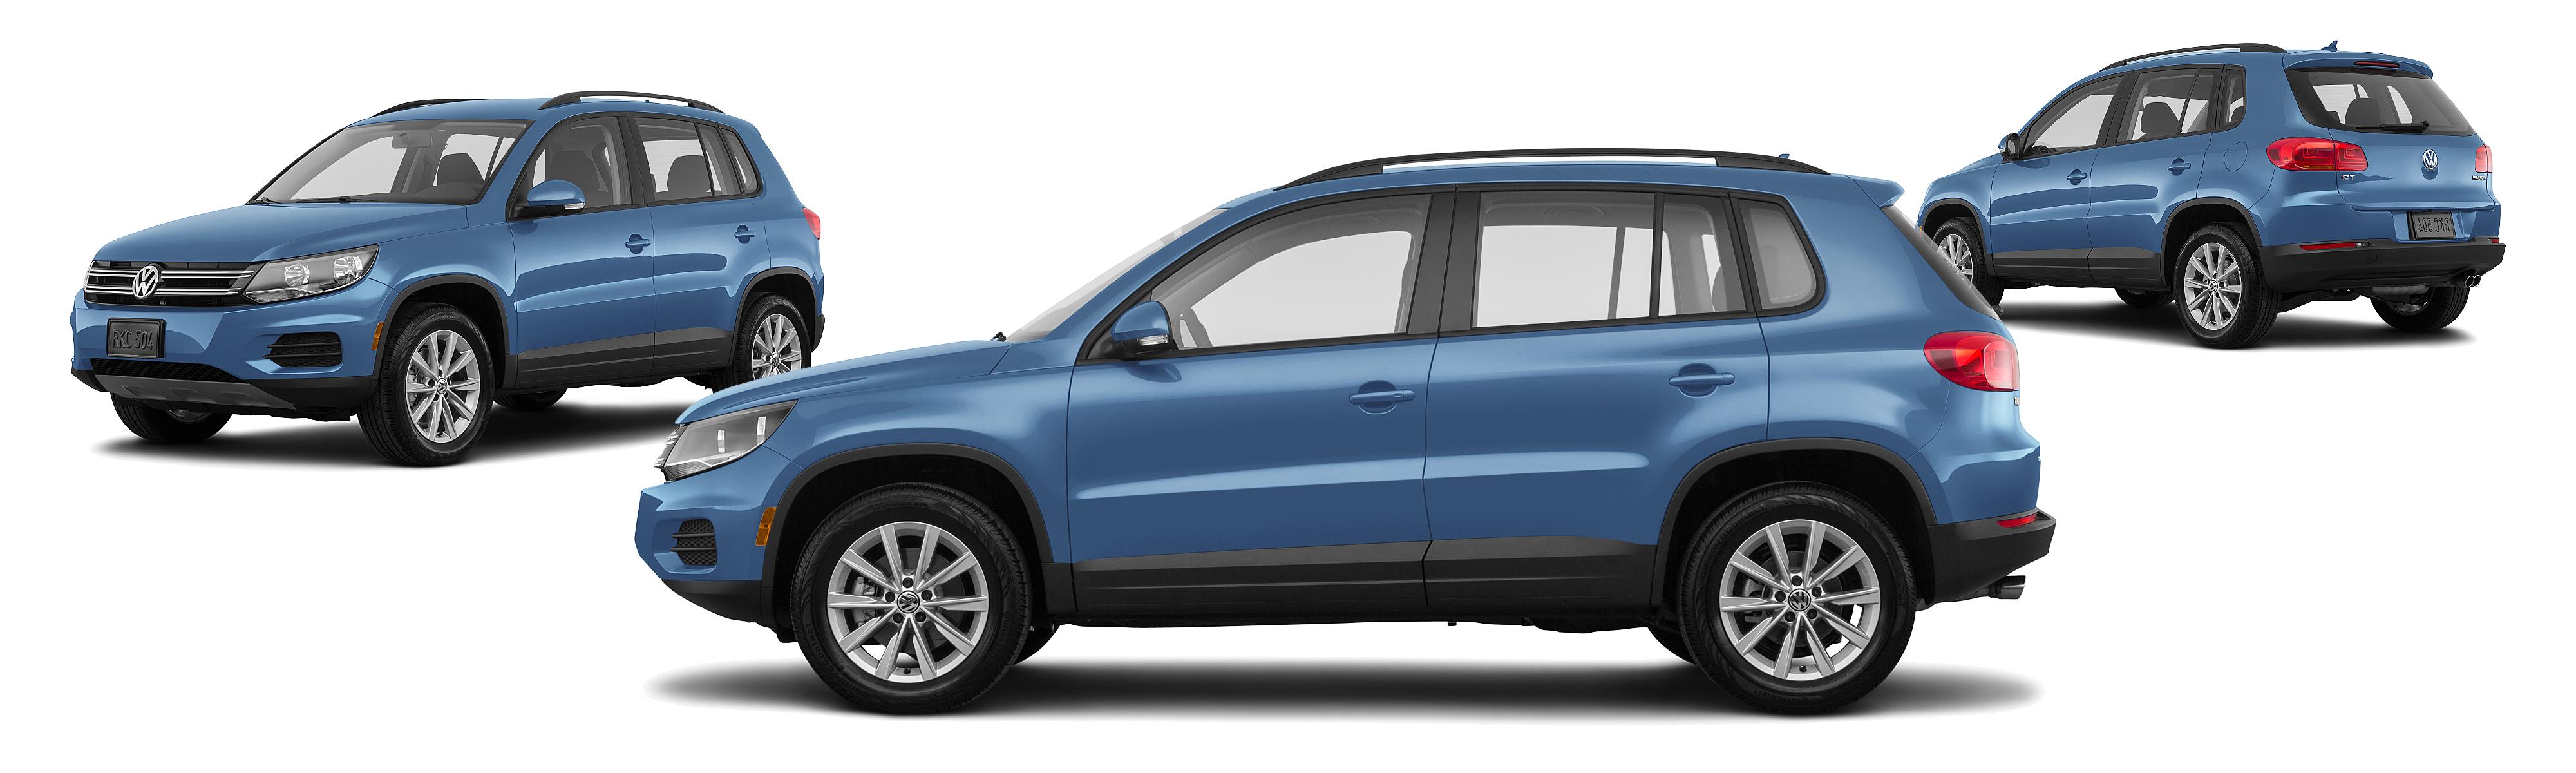 2018 Volkswagen Tiguan Limited 2.0T 4dr SUV - Research - GrooveCar